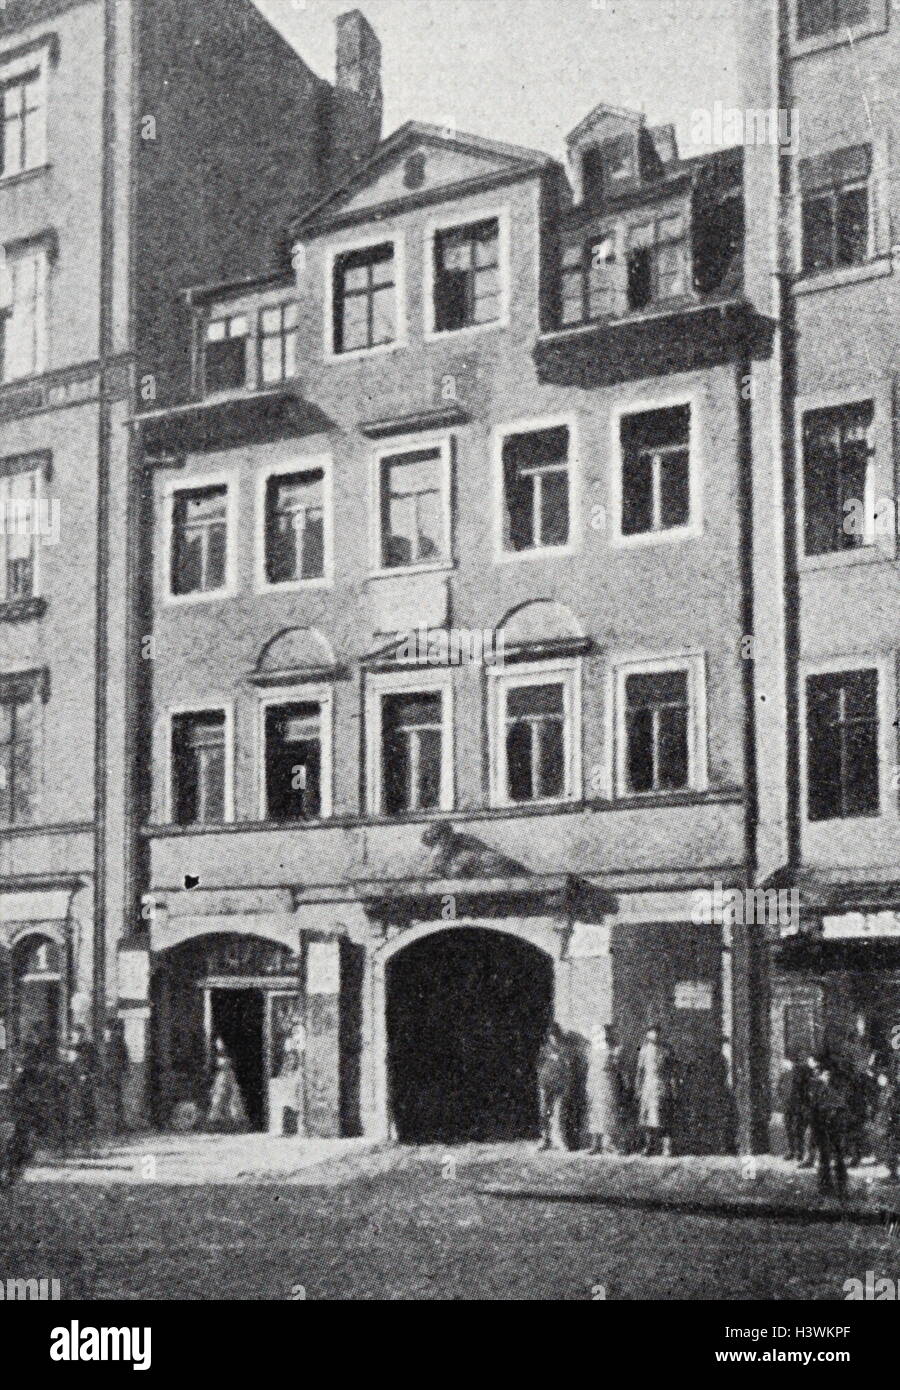 Birthplace of Richard Wagner (1813-1883) a German composer, theatre director, polemicist, and conductor. Dated 19th Century Stock Photo